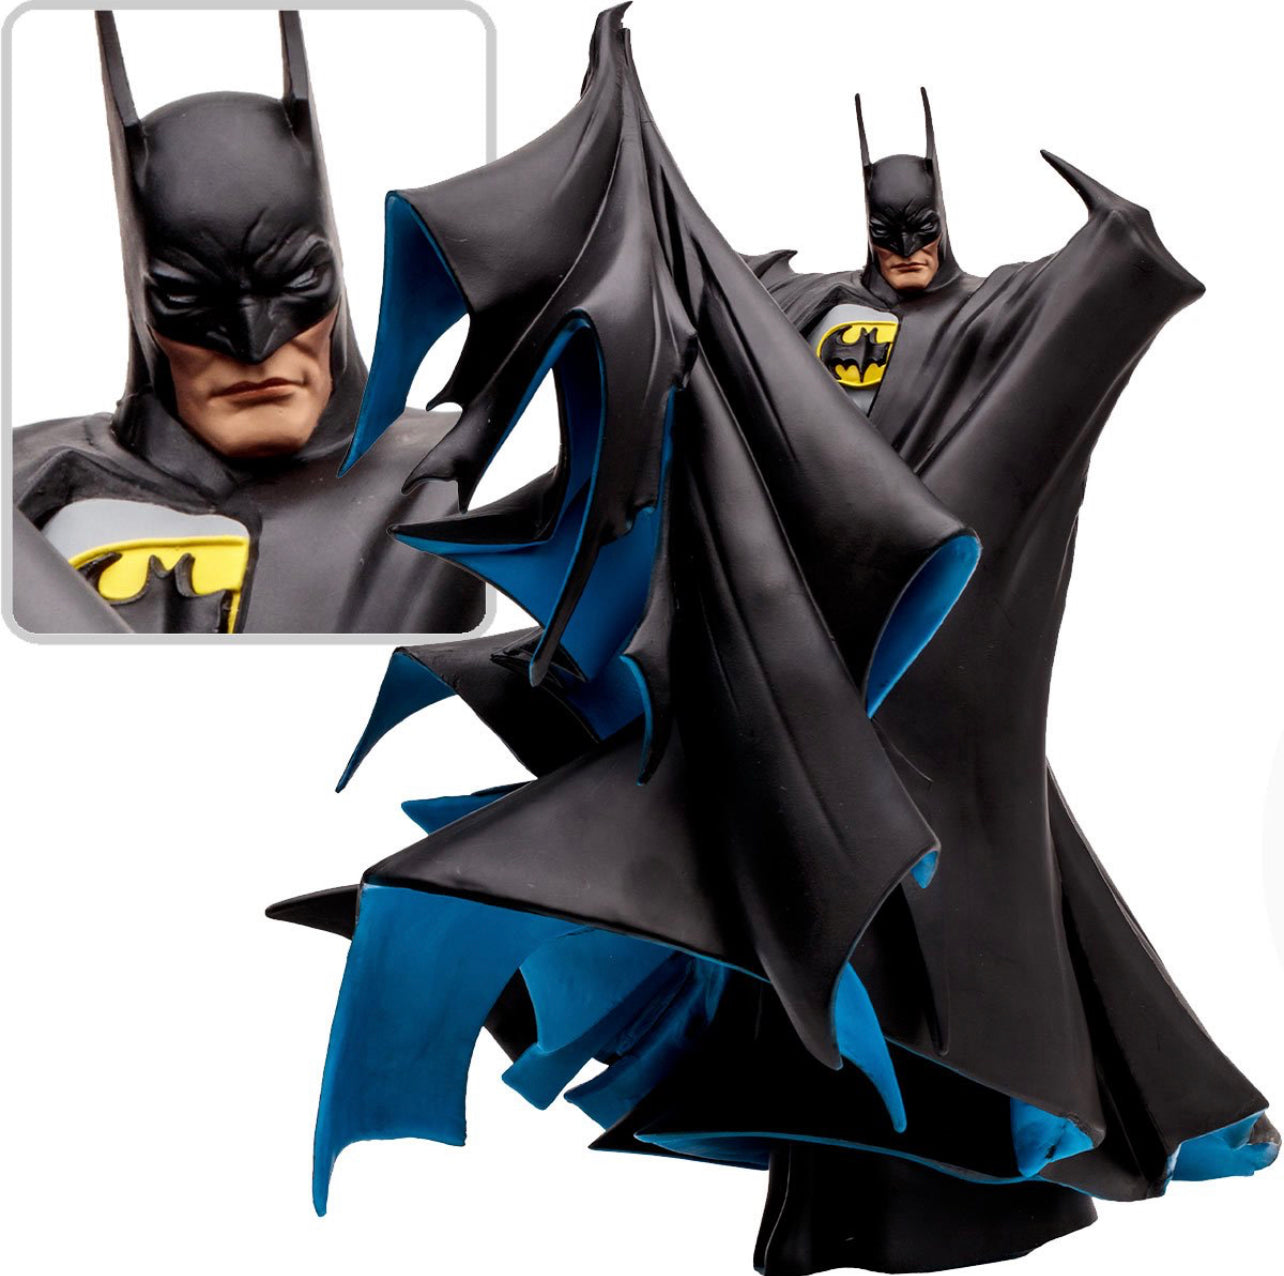 Pre Order! Batman by Todd McFarlane 1:8 Scale Statue with McFarlane Toys Digital Collectible (SRP ₱4,000) (BLACK VERSION)